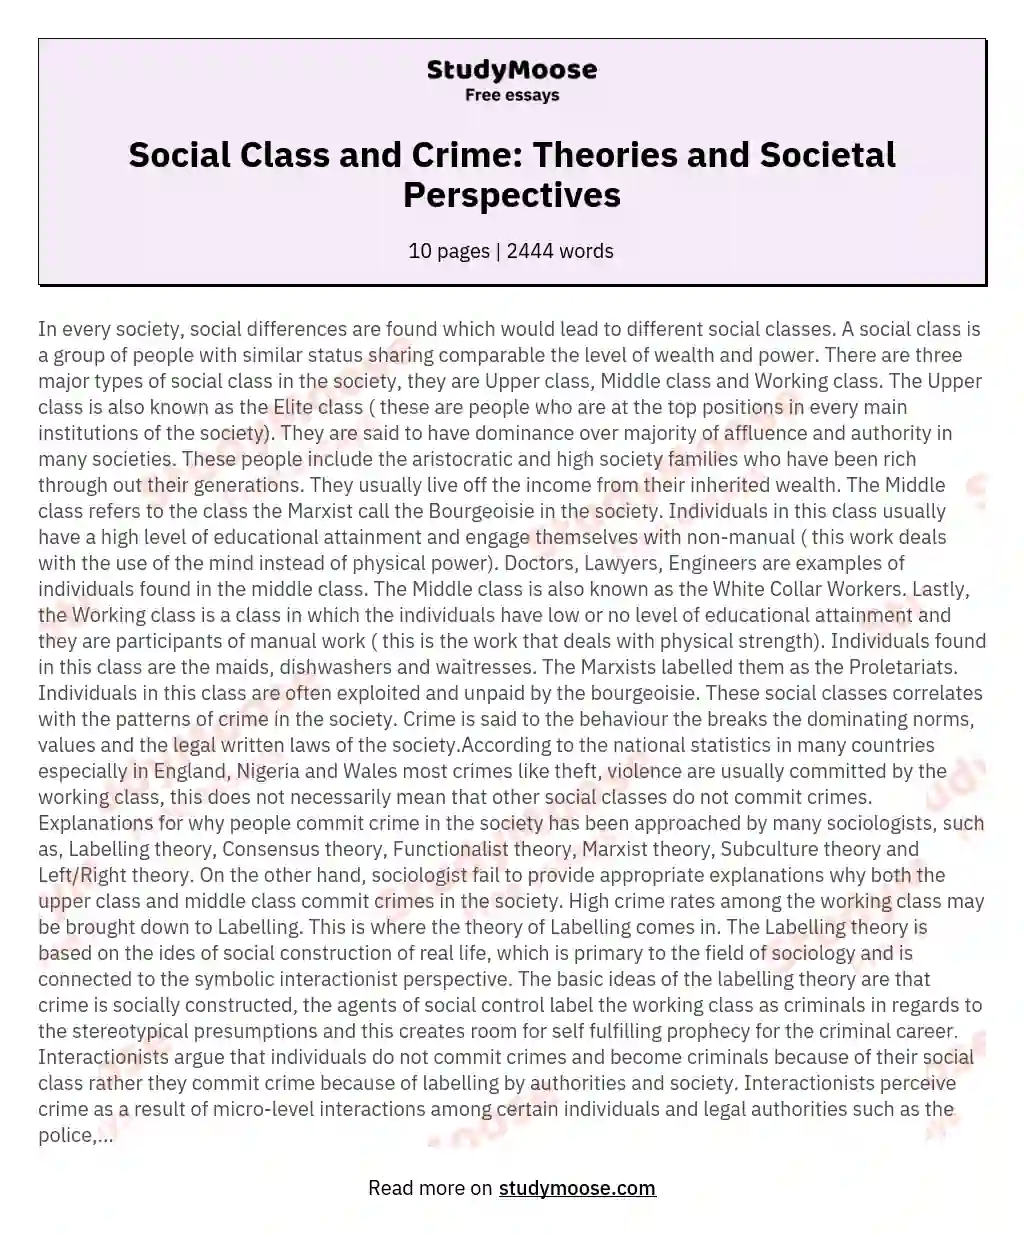 Social Class and Crime: Theories and Societal Perspectives essay